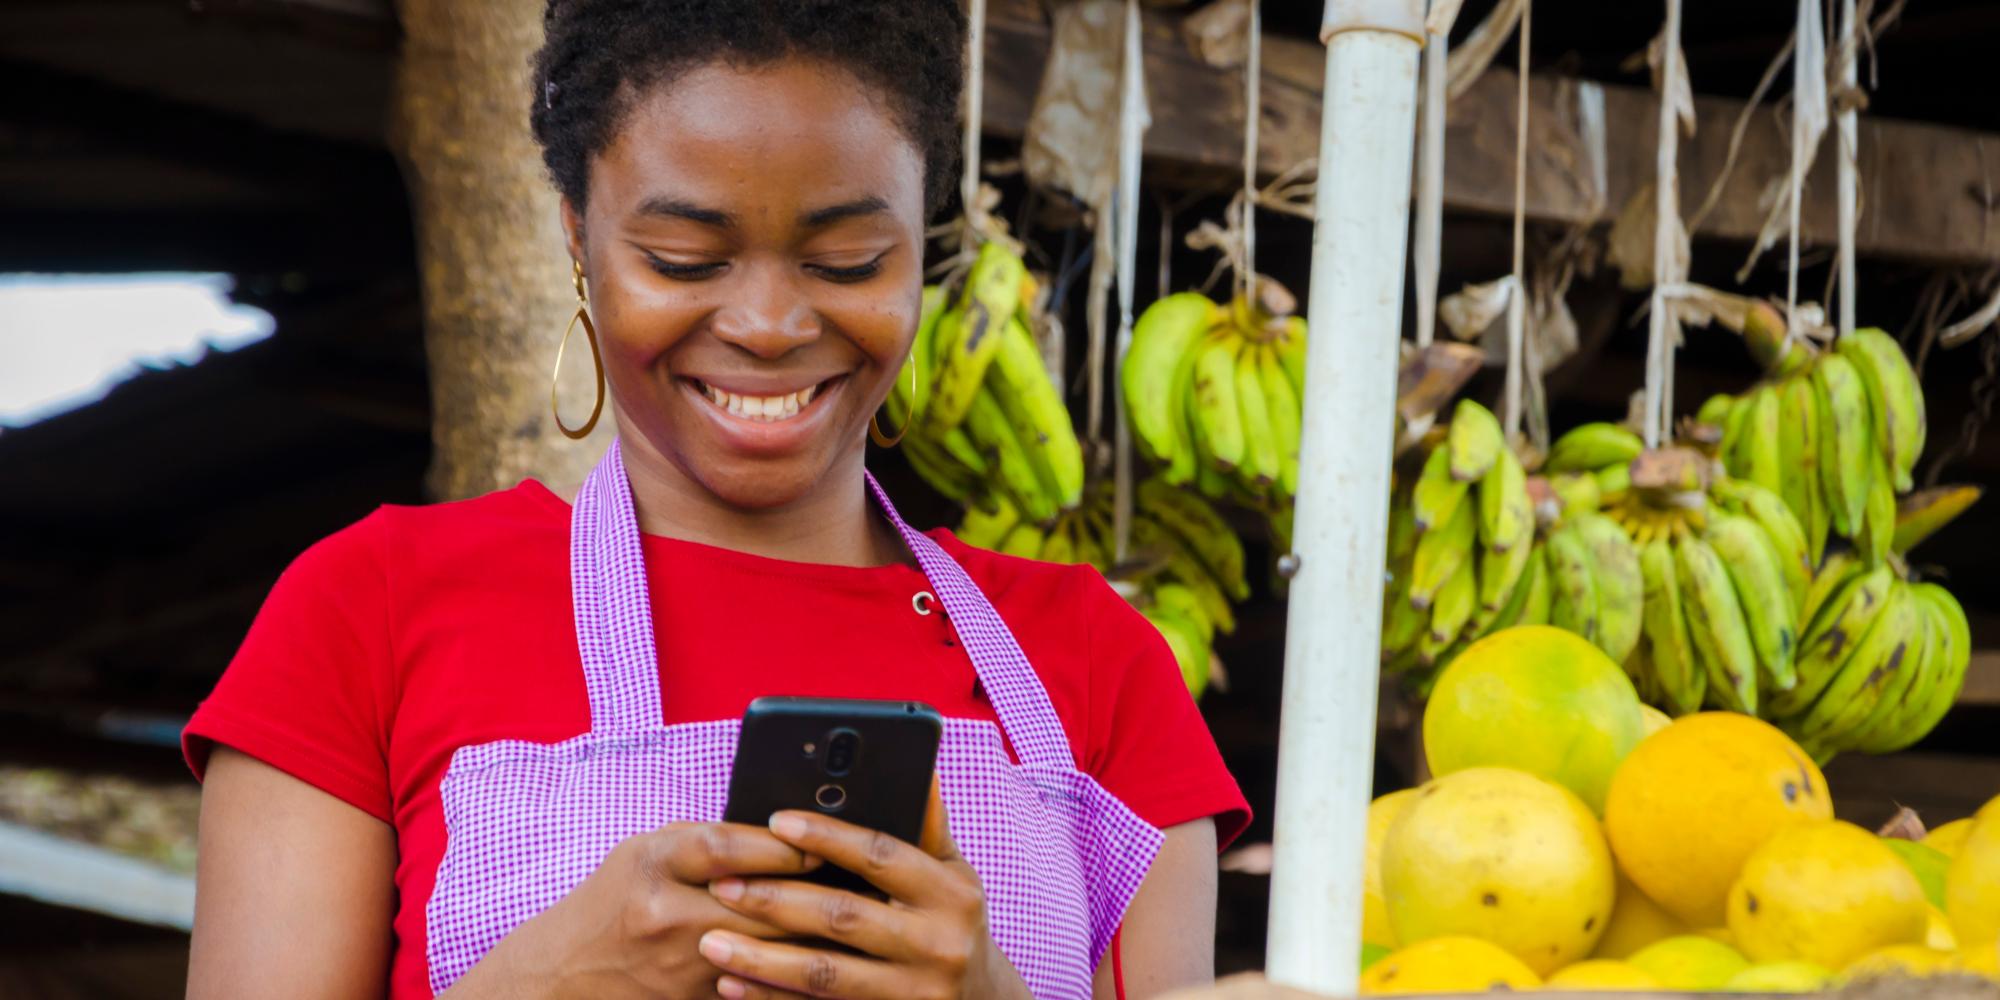 Nigerian woman working at market uses mobile phone